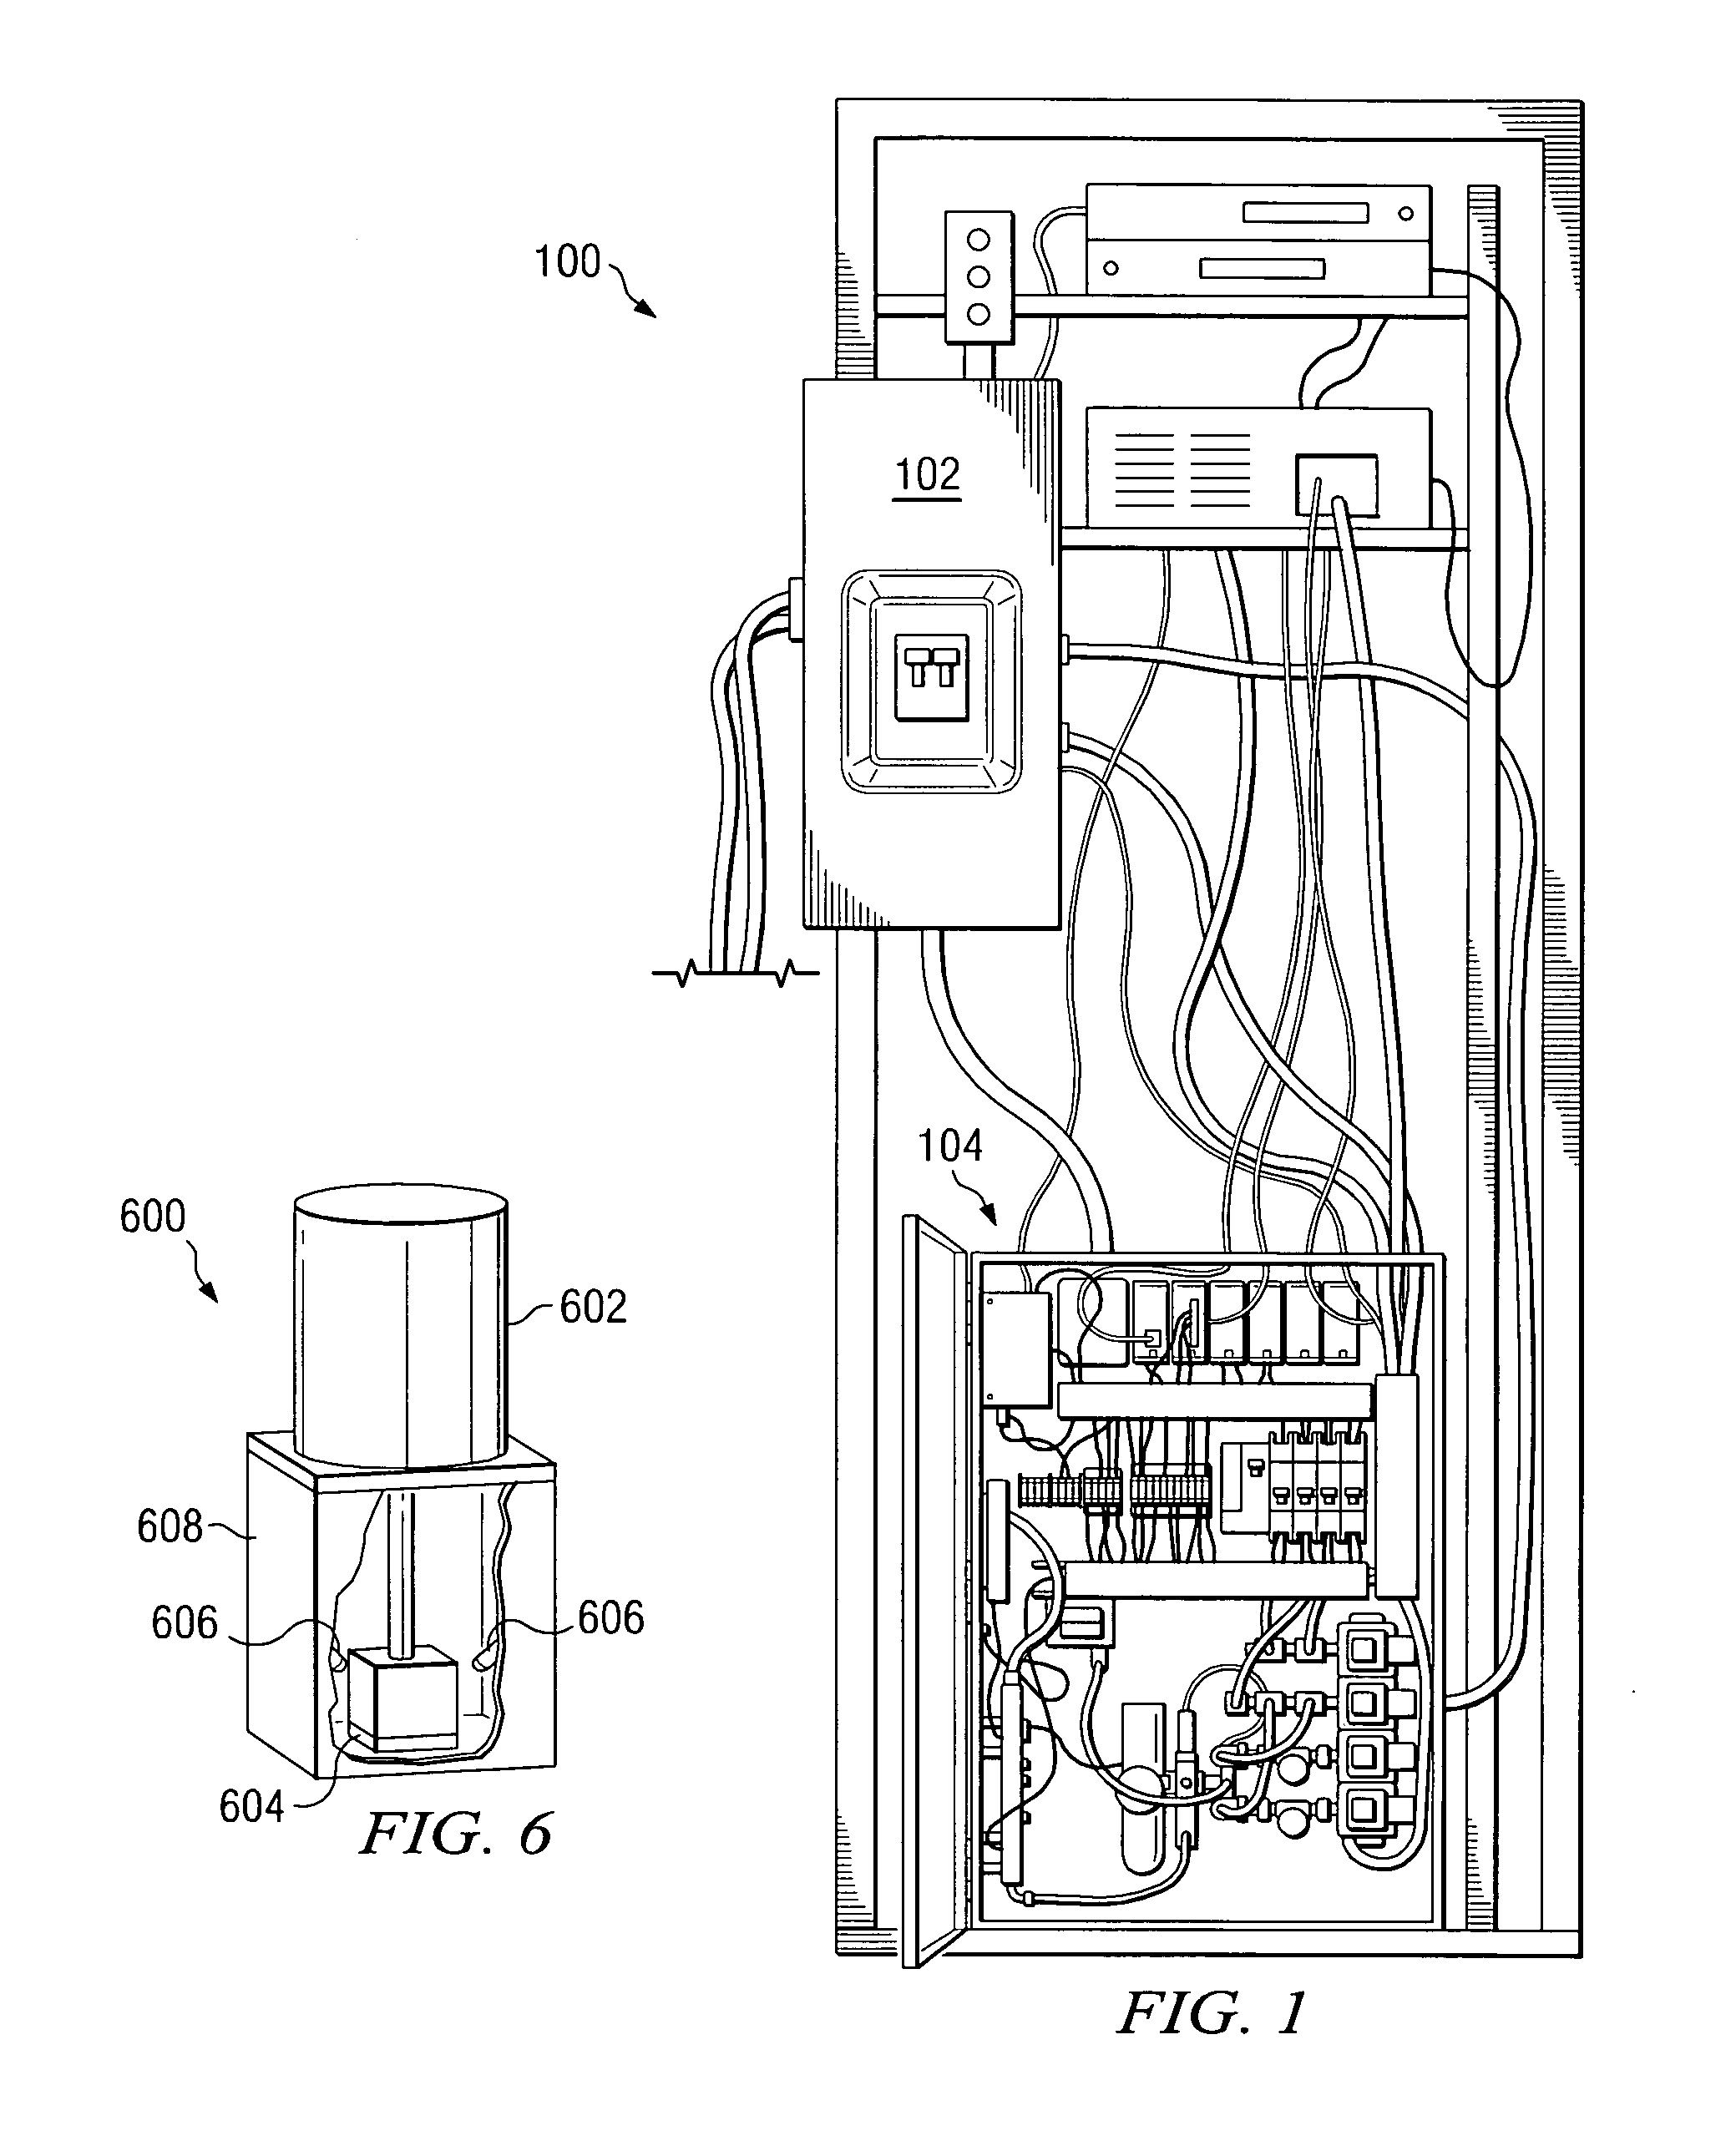 Temperature and condensation control system for functional tester